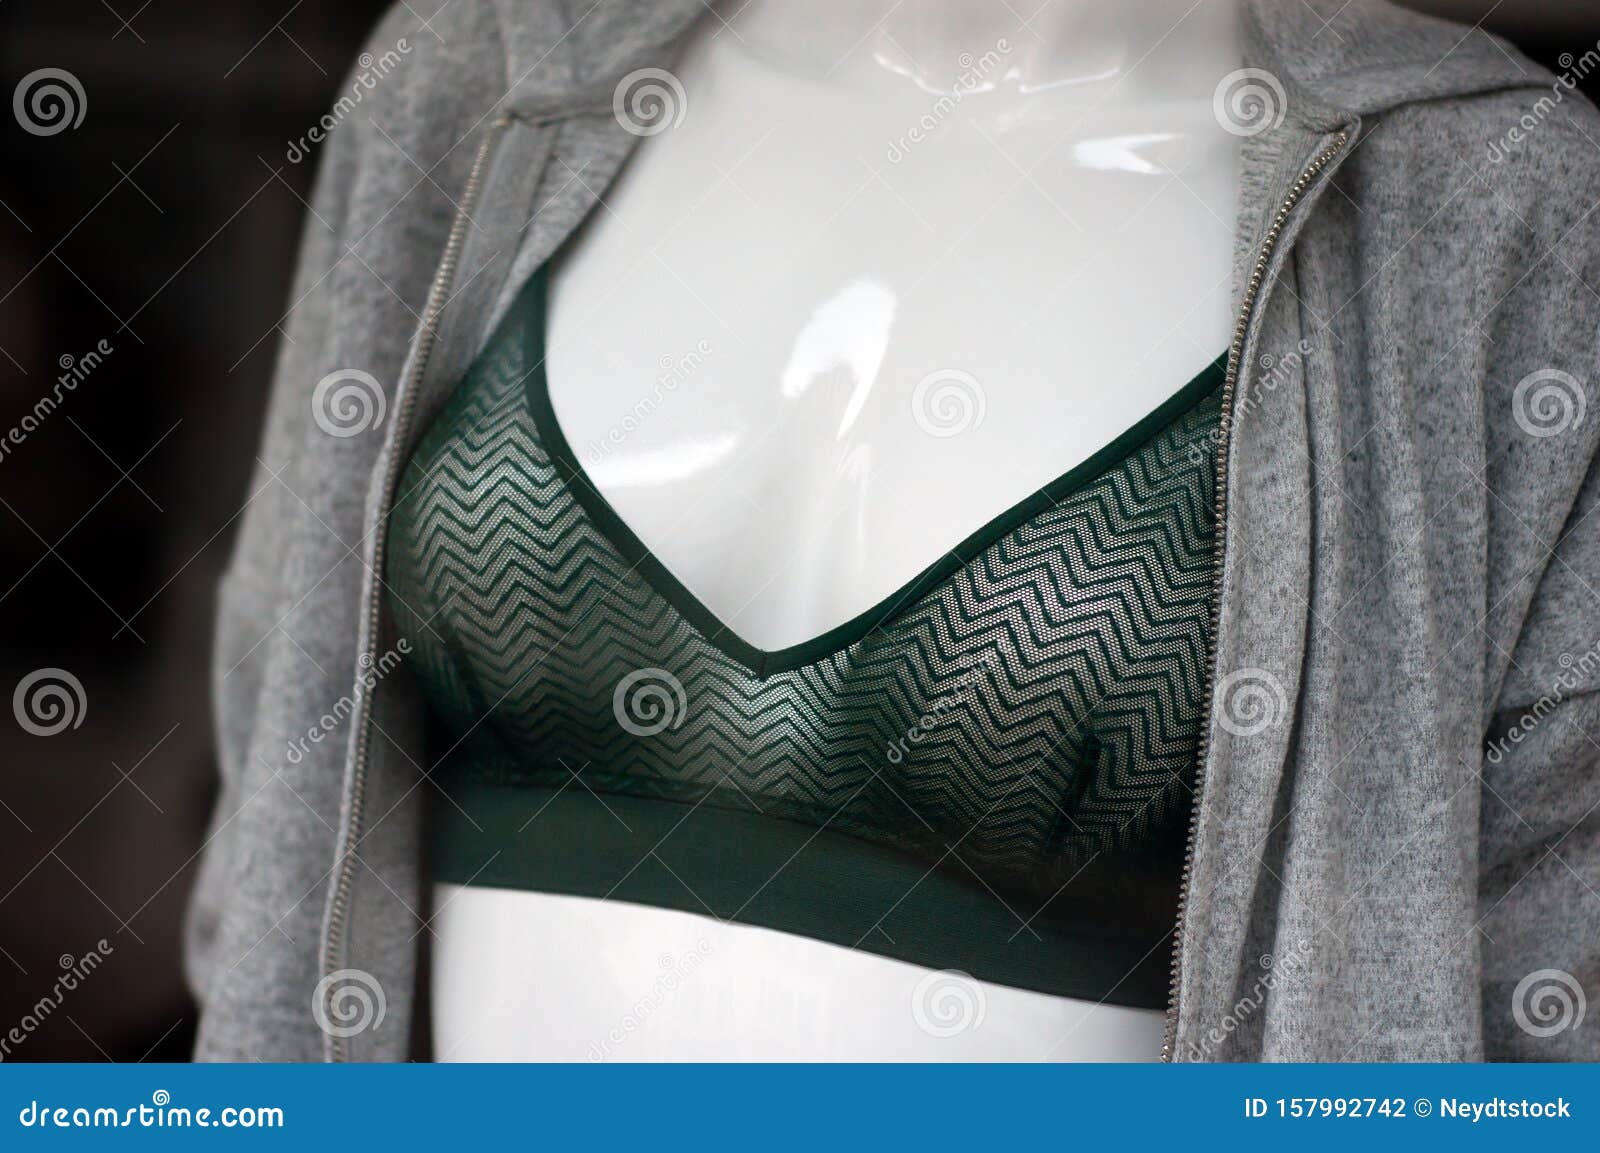 Green Transparent Bra on Mannequin in Fashion Store Showroom Stock